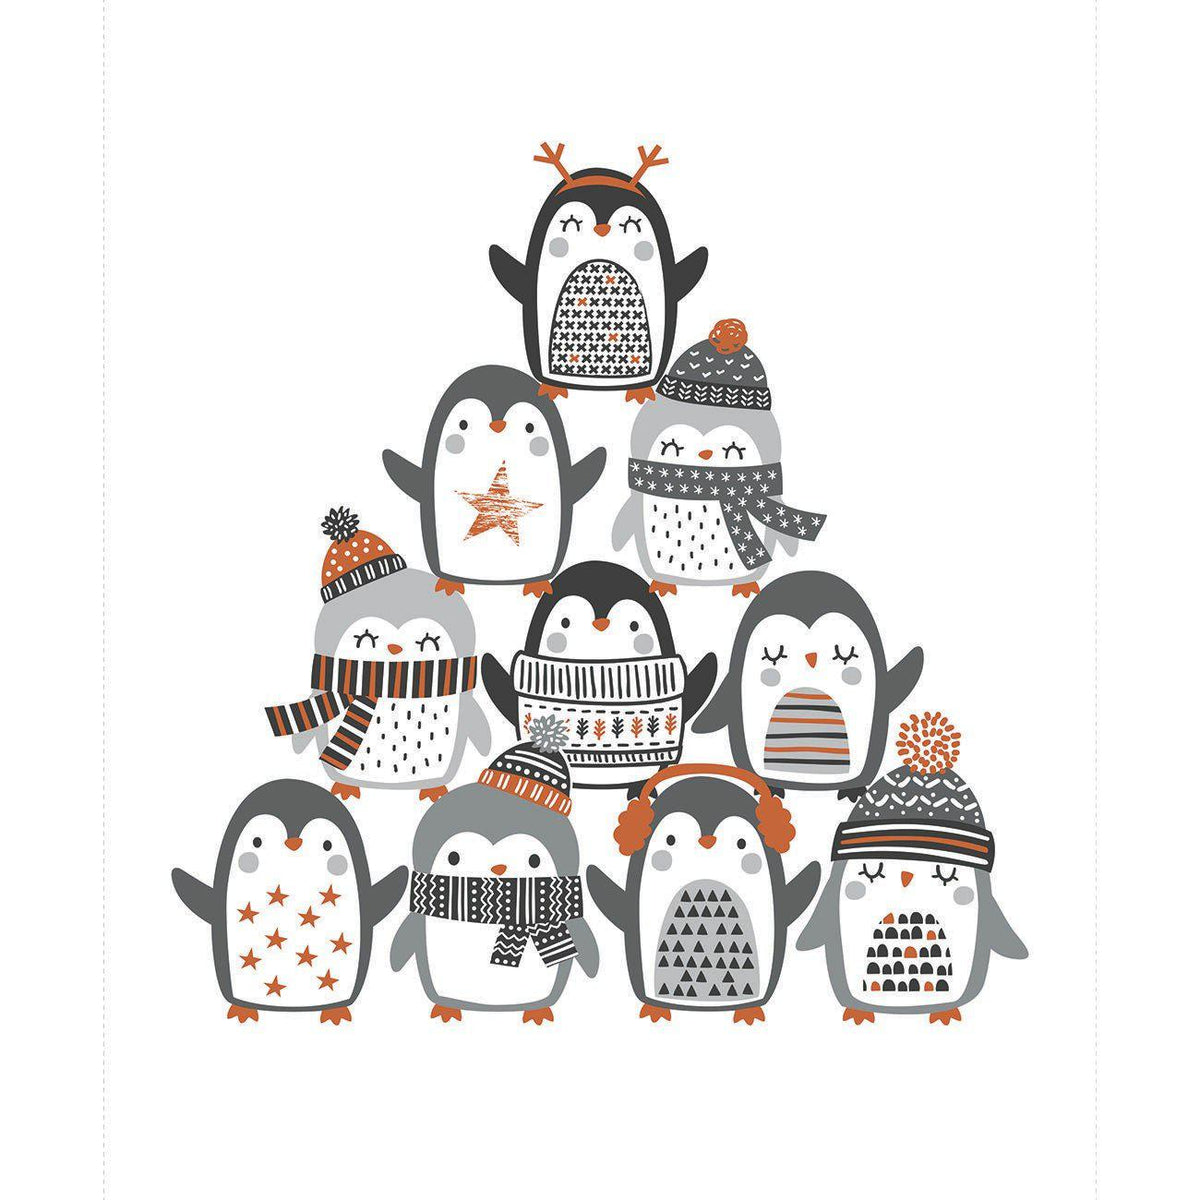 Penguin Paradise White Penguin Pyramid Panel 36″x 44/45″ by Puck ...